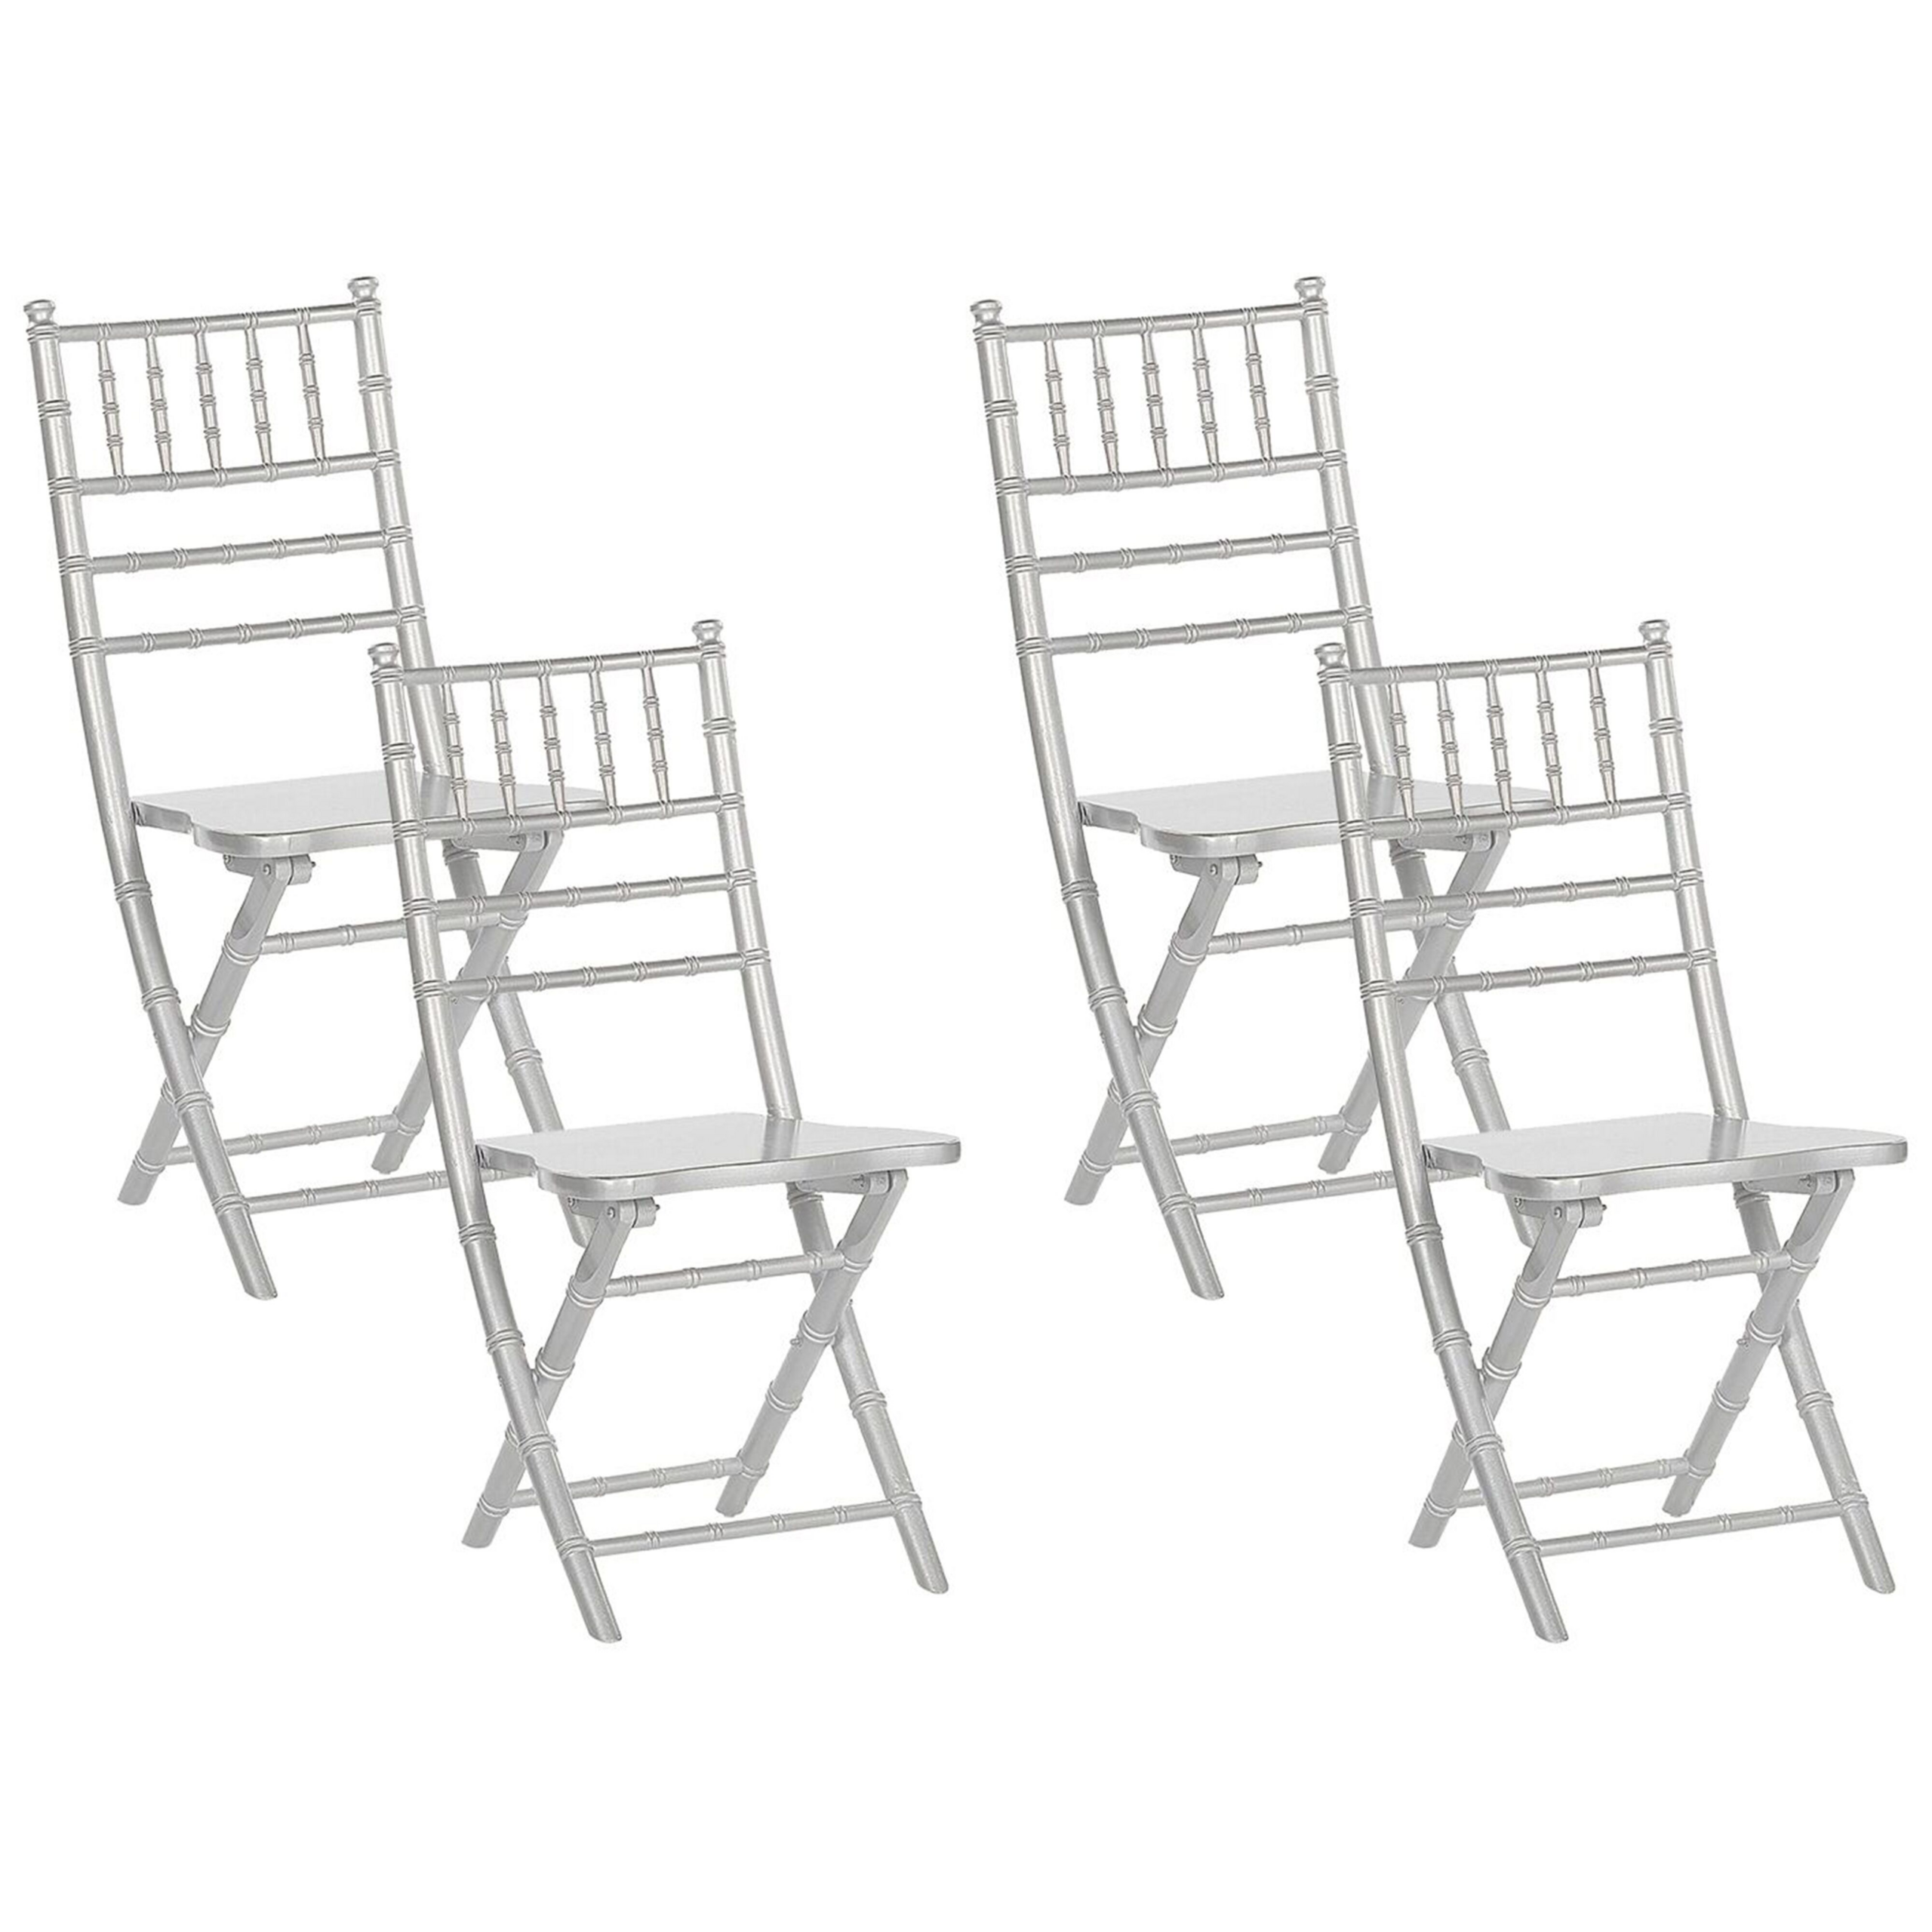 Beliani Set of 4 Folding Chairs Silver Beechwood Dining Room Chairs Contemporary Style